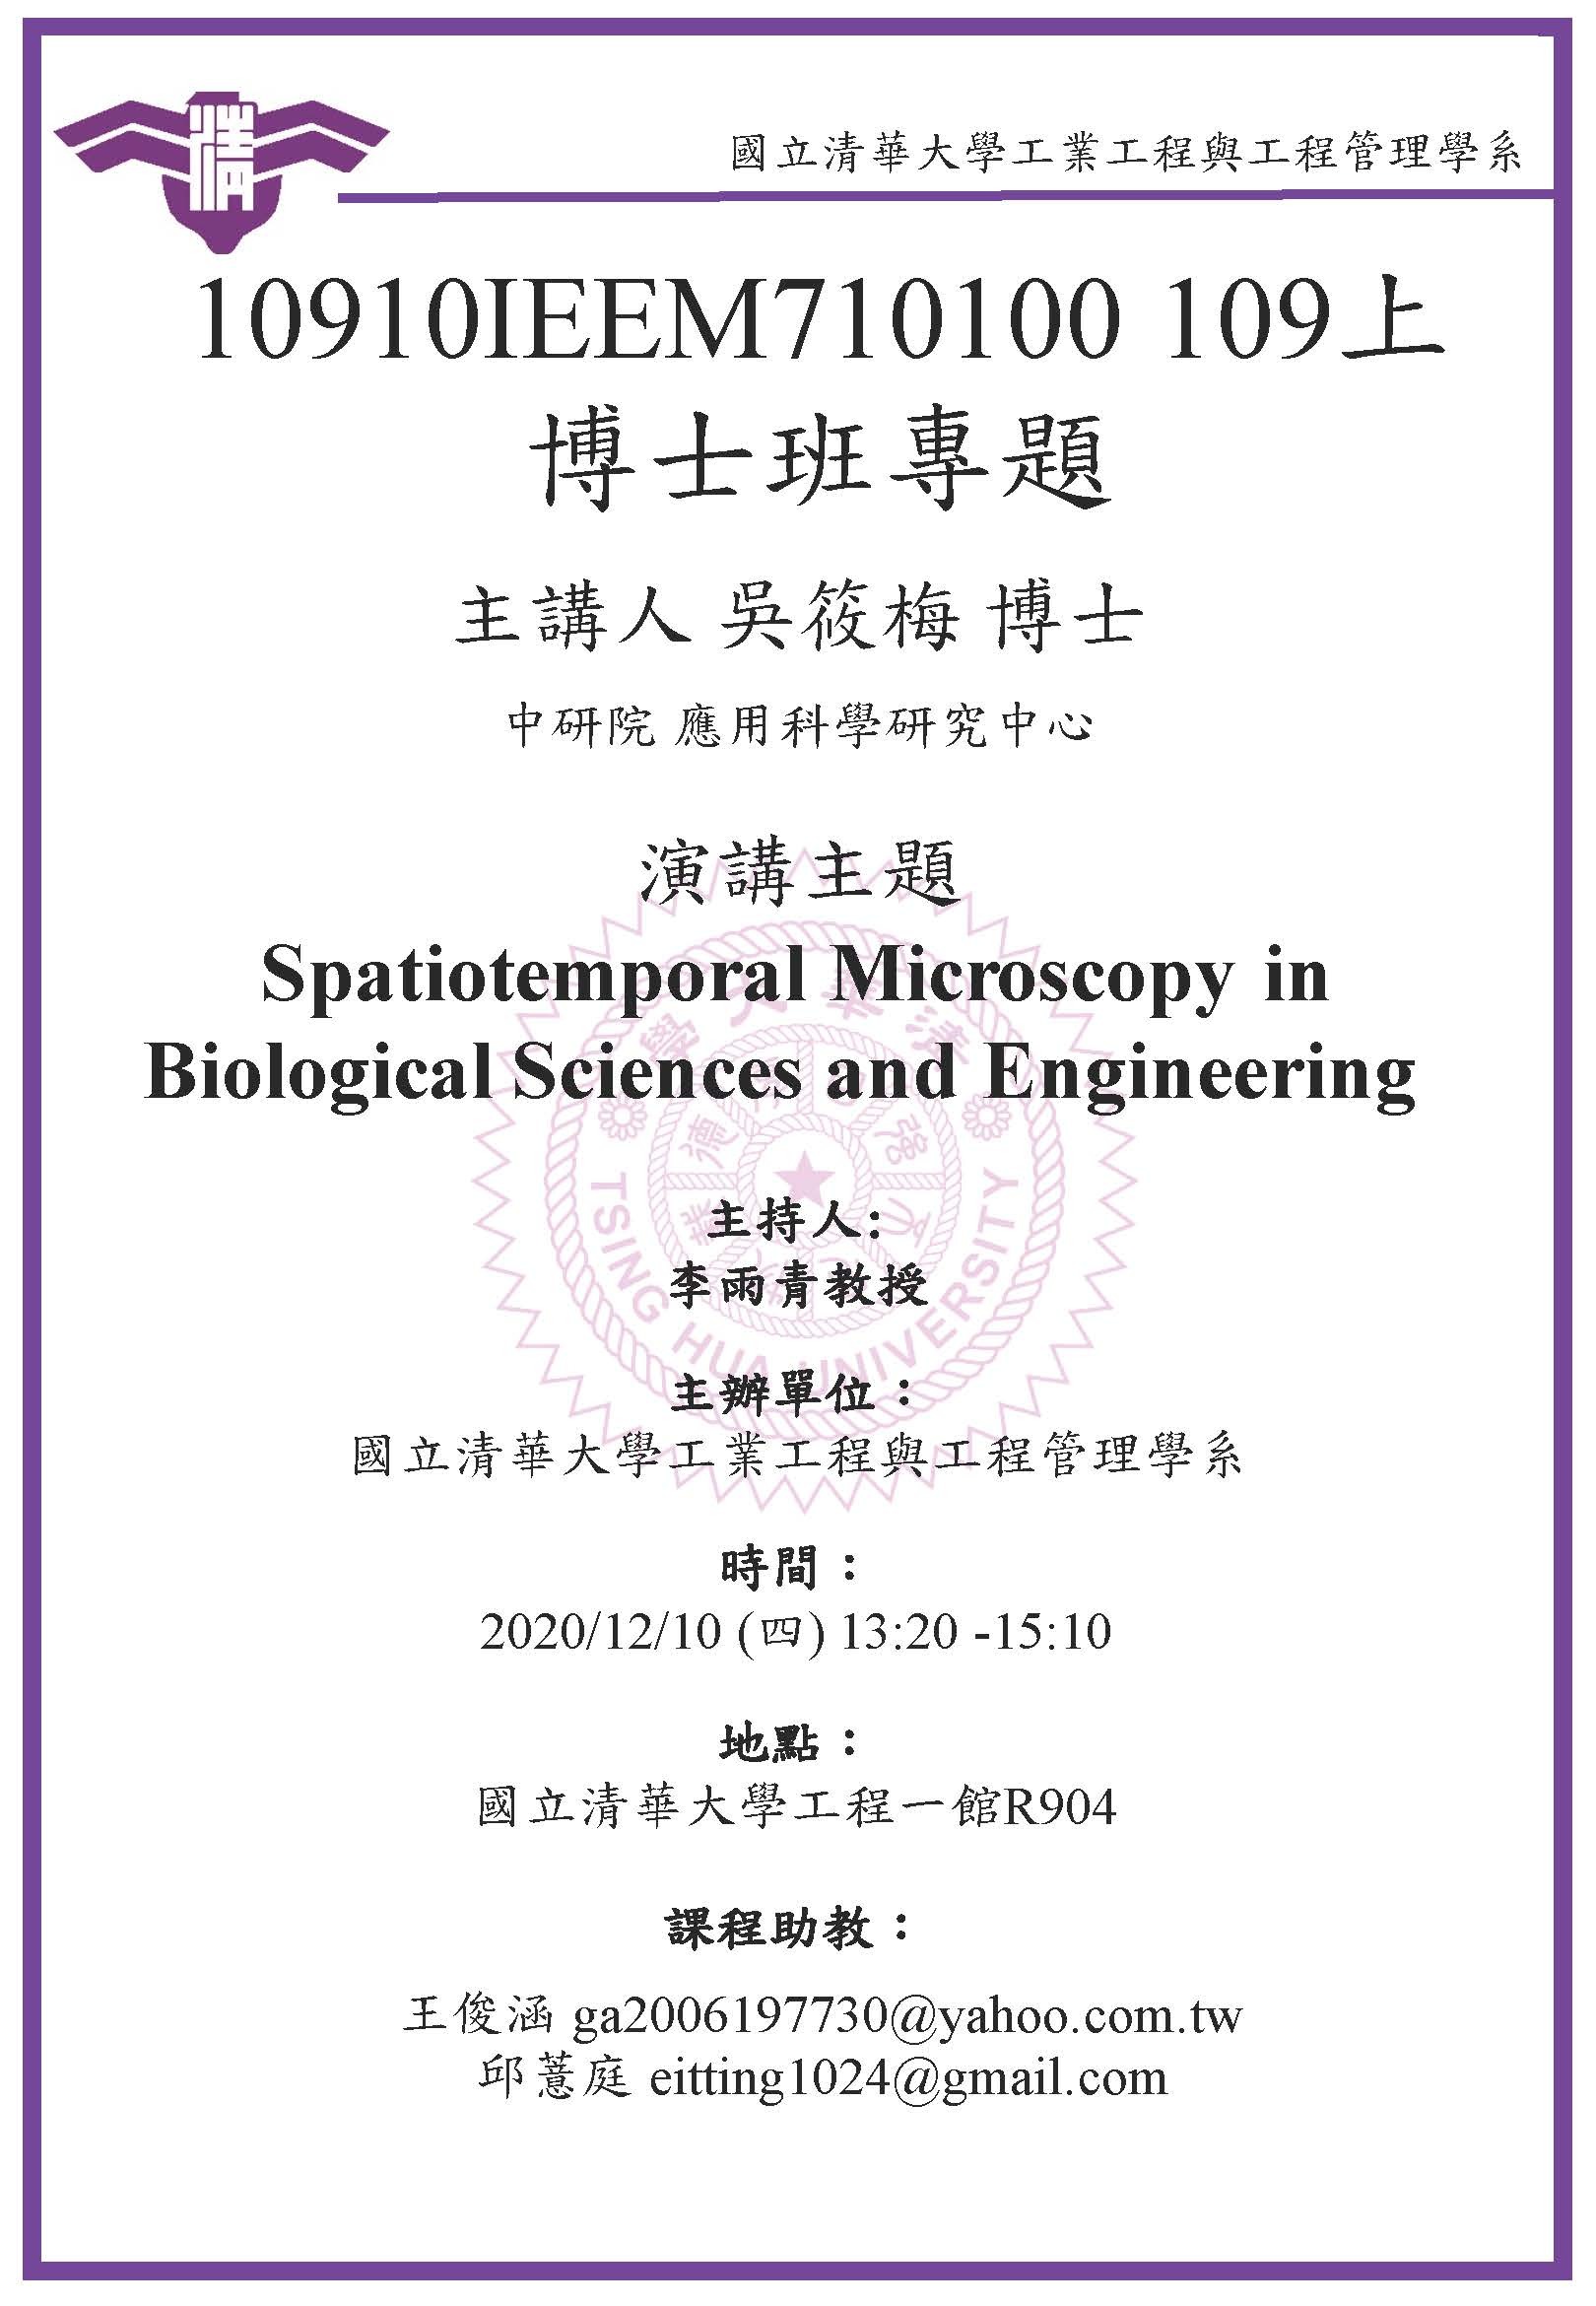 Spatiotemporal Microscopy in Biological Sciences and Engineering